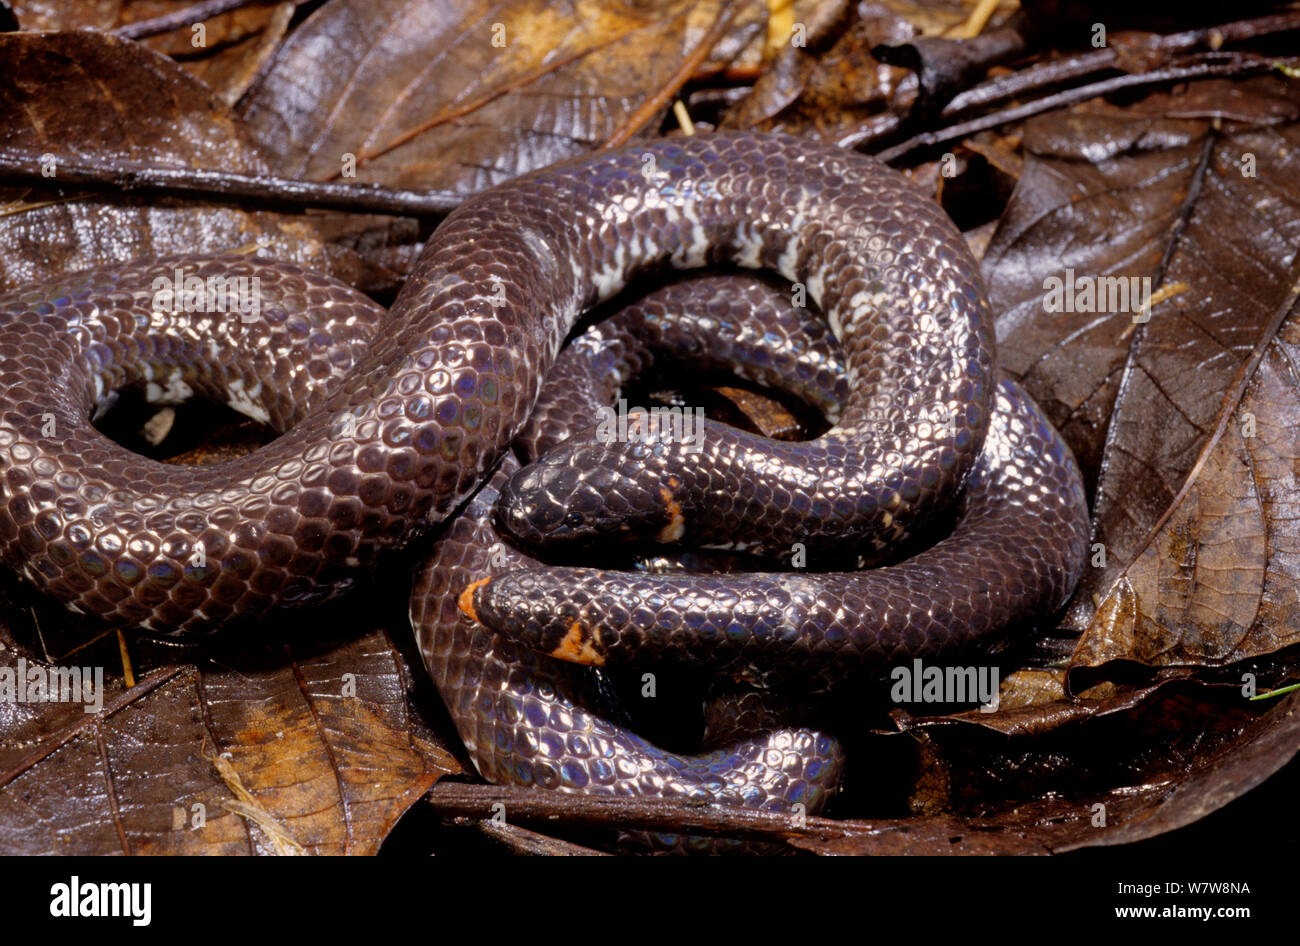 Red-tailed Pipe Snake 